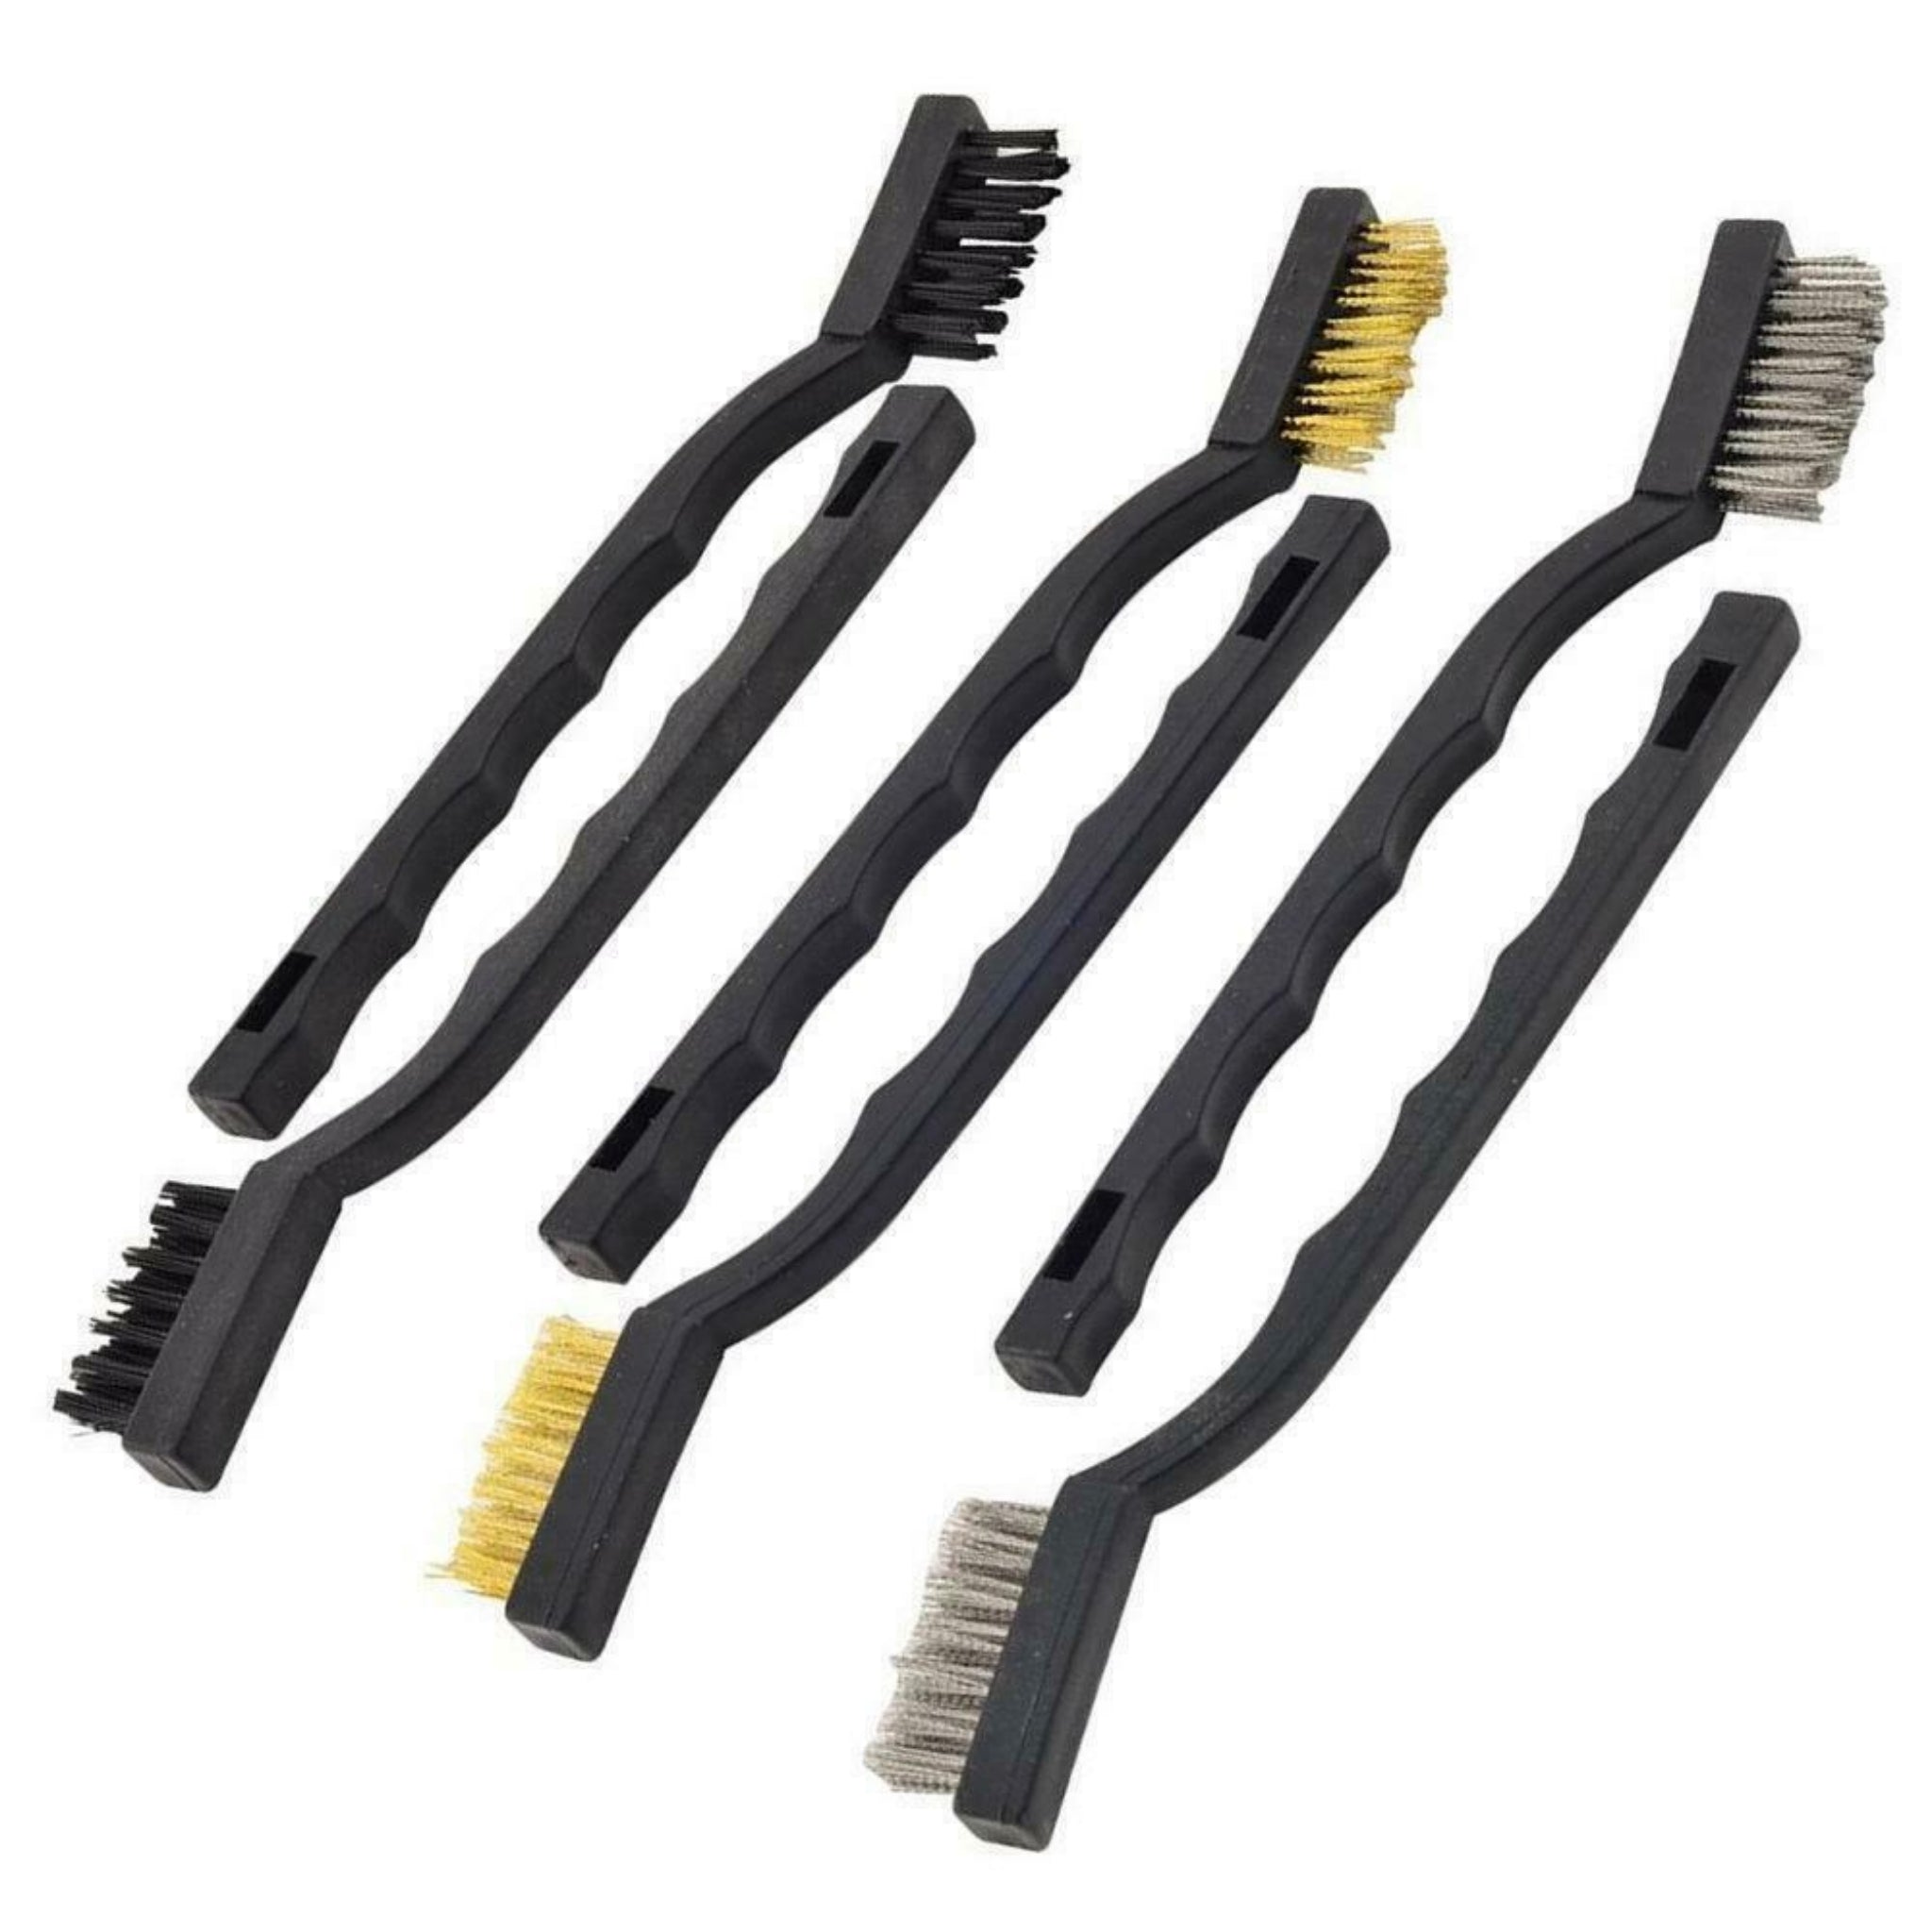 Beclen Harp 6pc Mini Stainless Steel/Nylon/Brass Wire Bristle Rush Removal Brush Set-Perfect Cleaning Tool SM